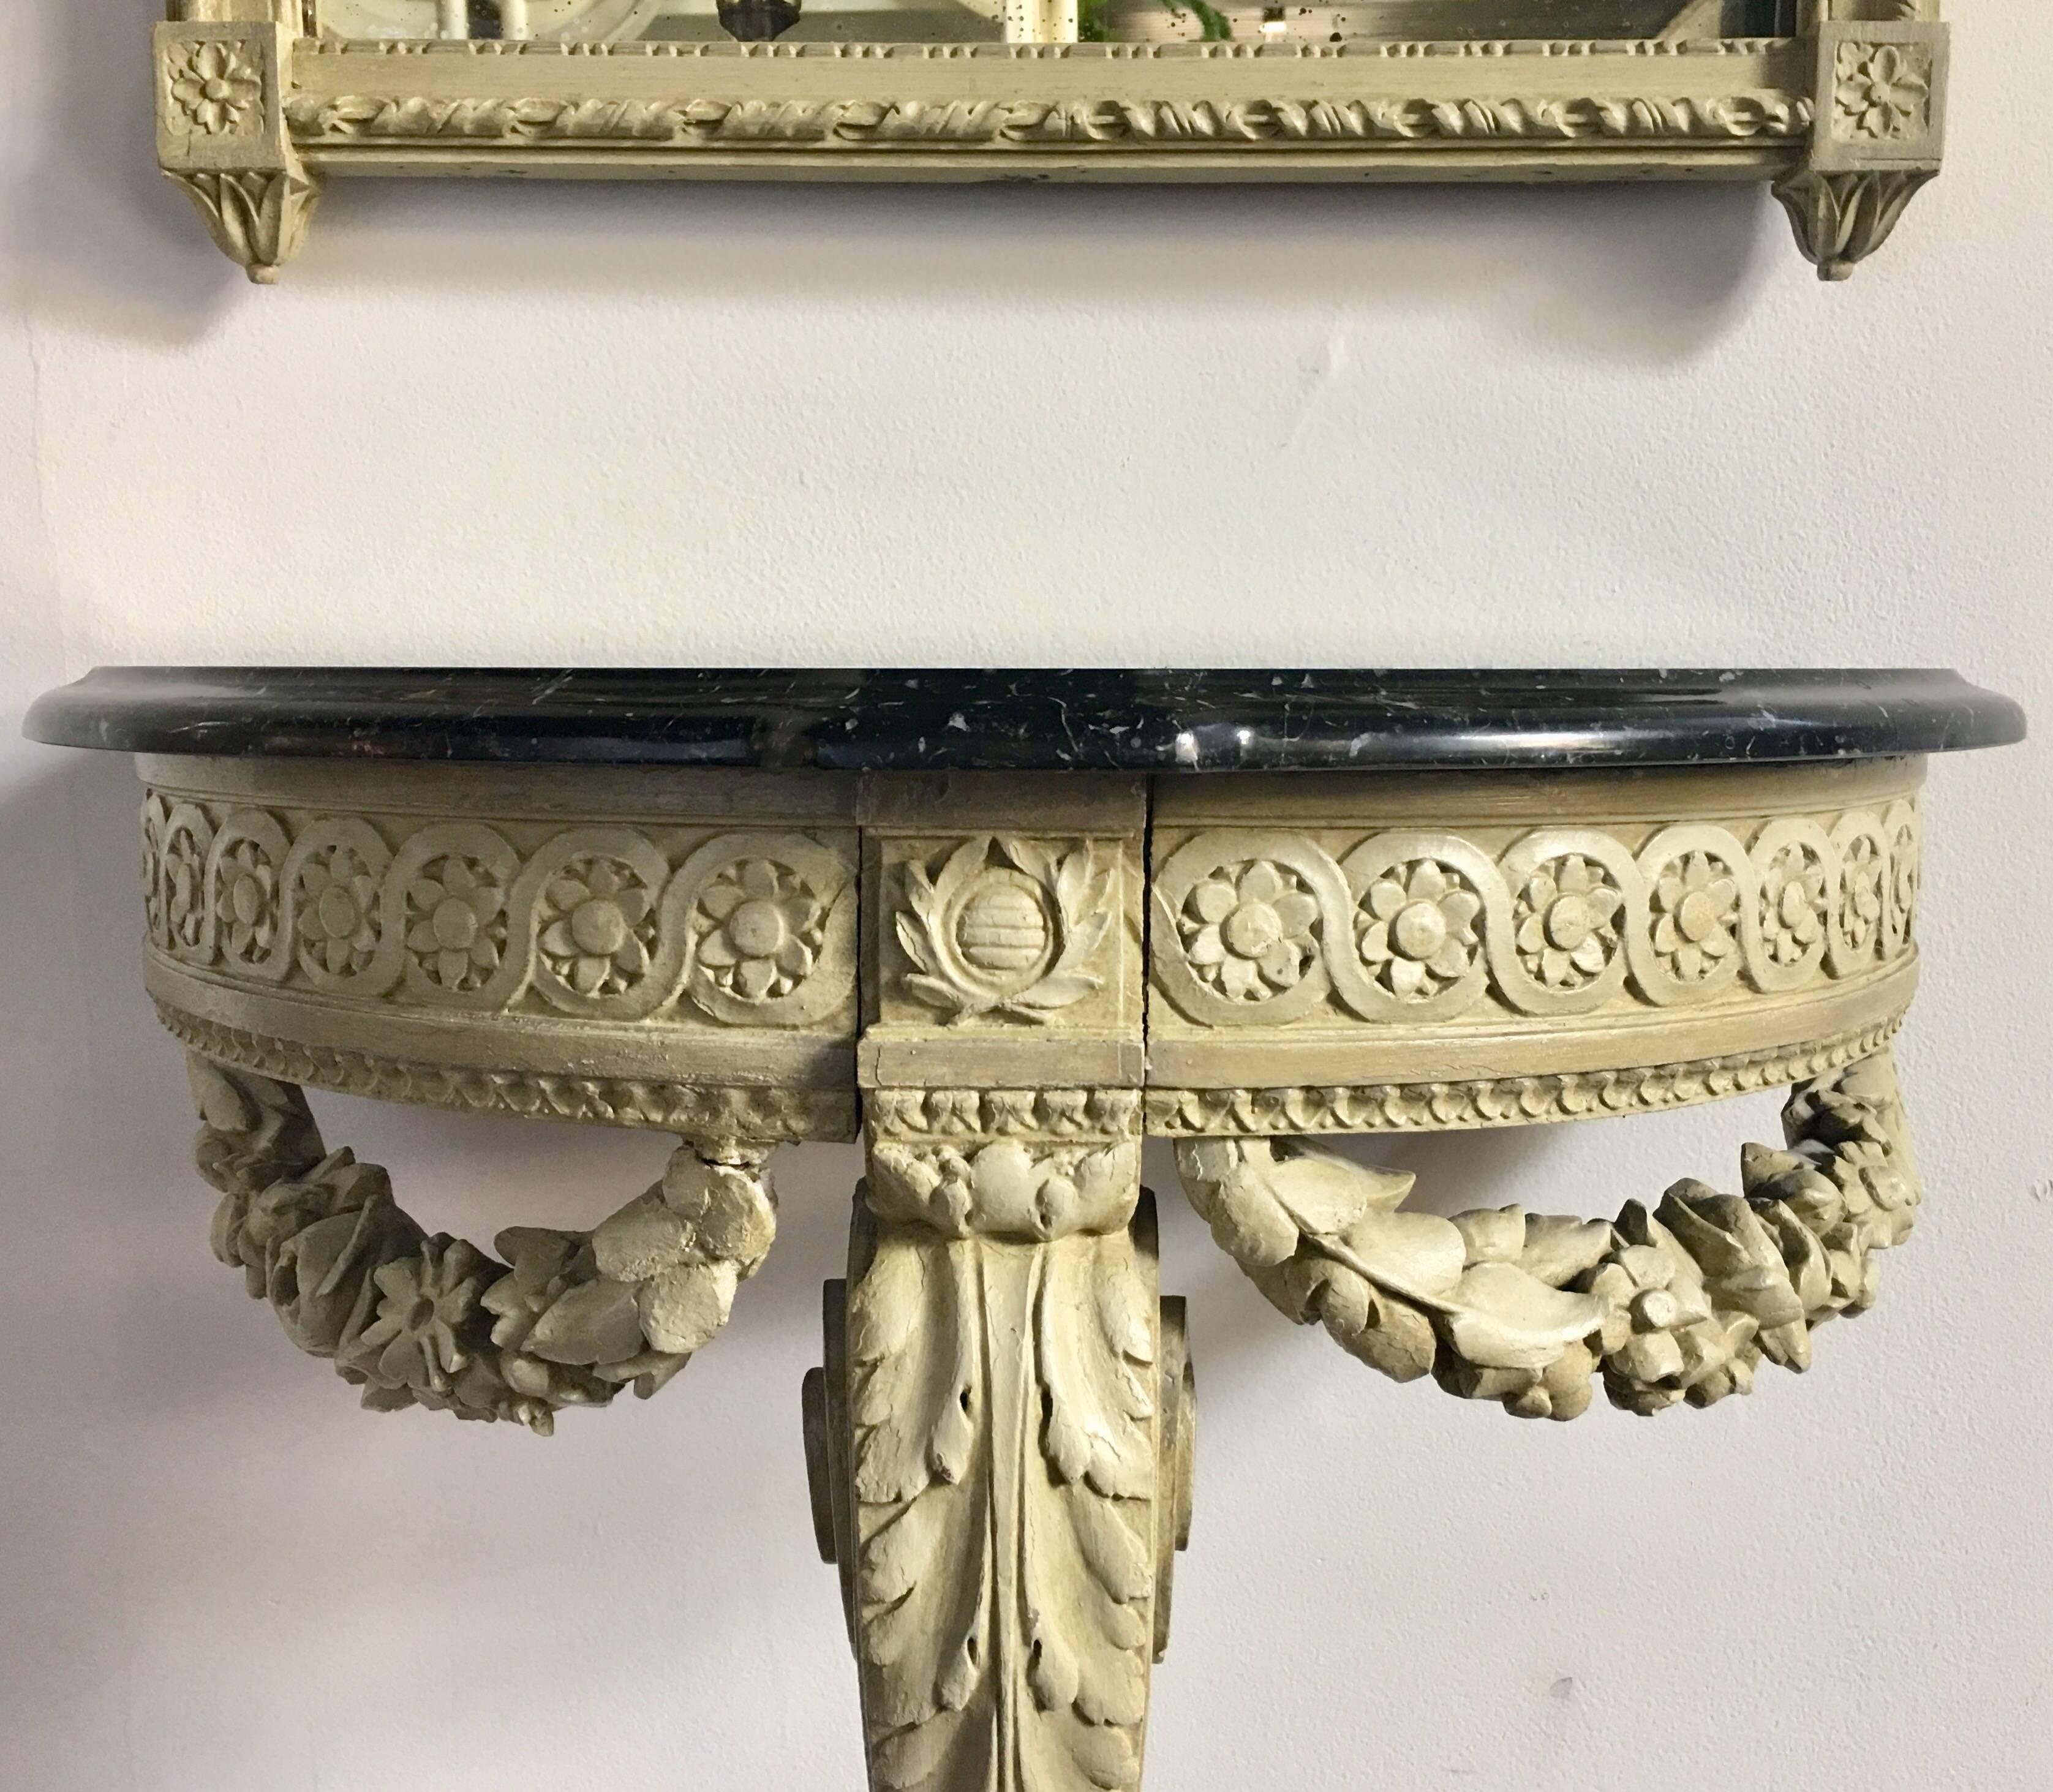 Louis XVI French style wall mount demilune console table and tall pier mirror. This small petite console table features single scrolling support and carved garland detailing with a new black stone top. Both pieces feature original cream tone painted